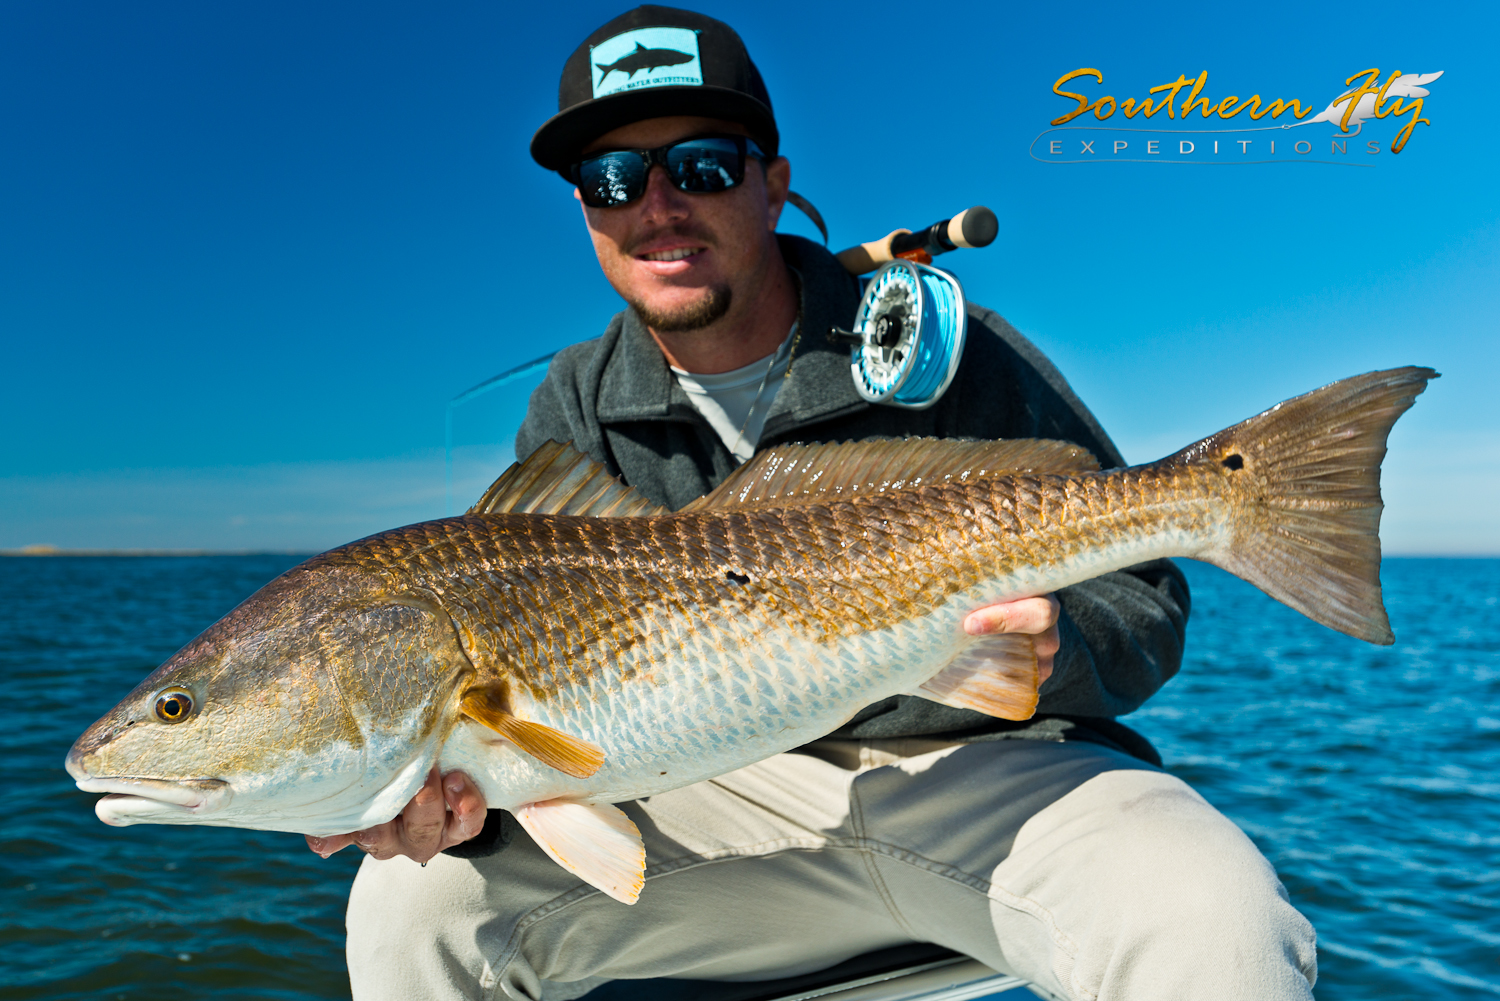 Catch Redfish with Southern Fly Expeditions - A New Orleans Fly Fishing Guide 